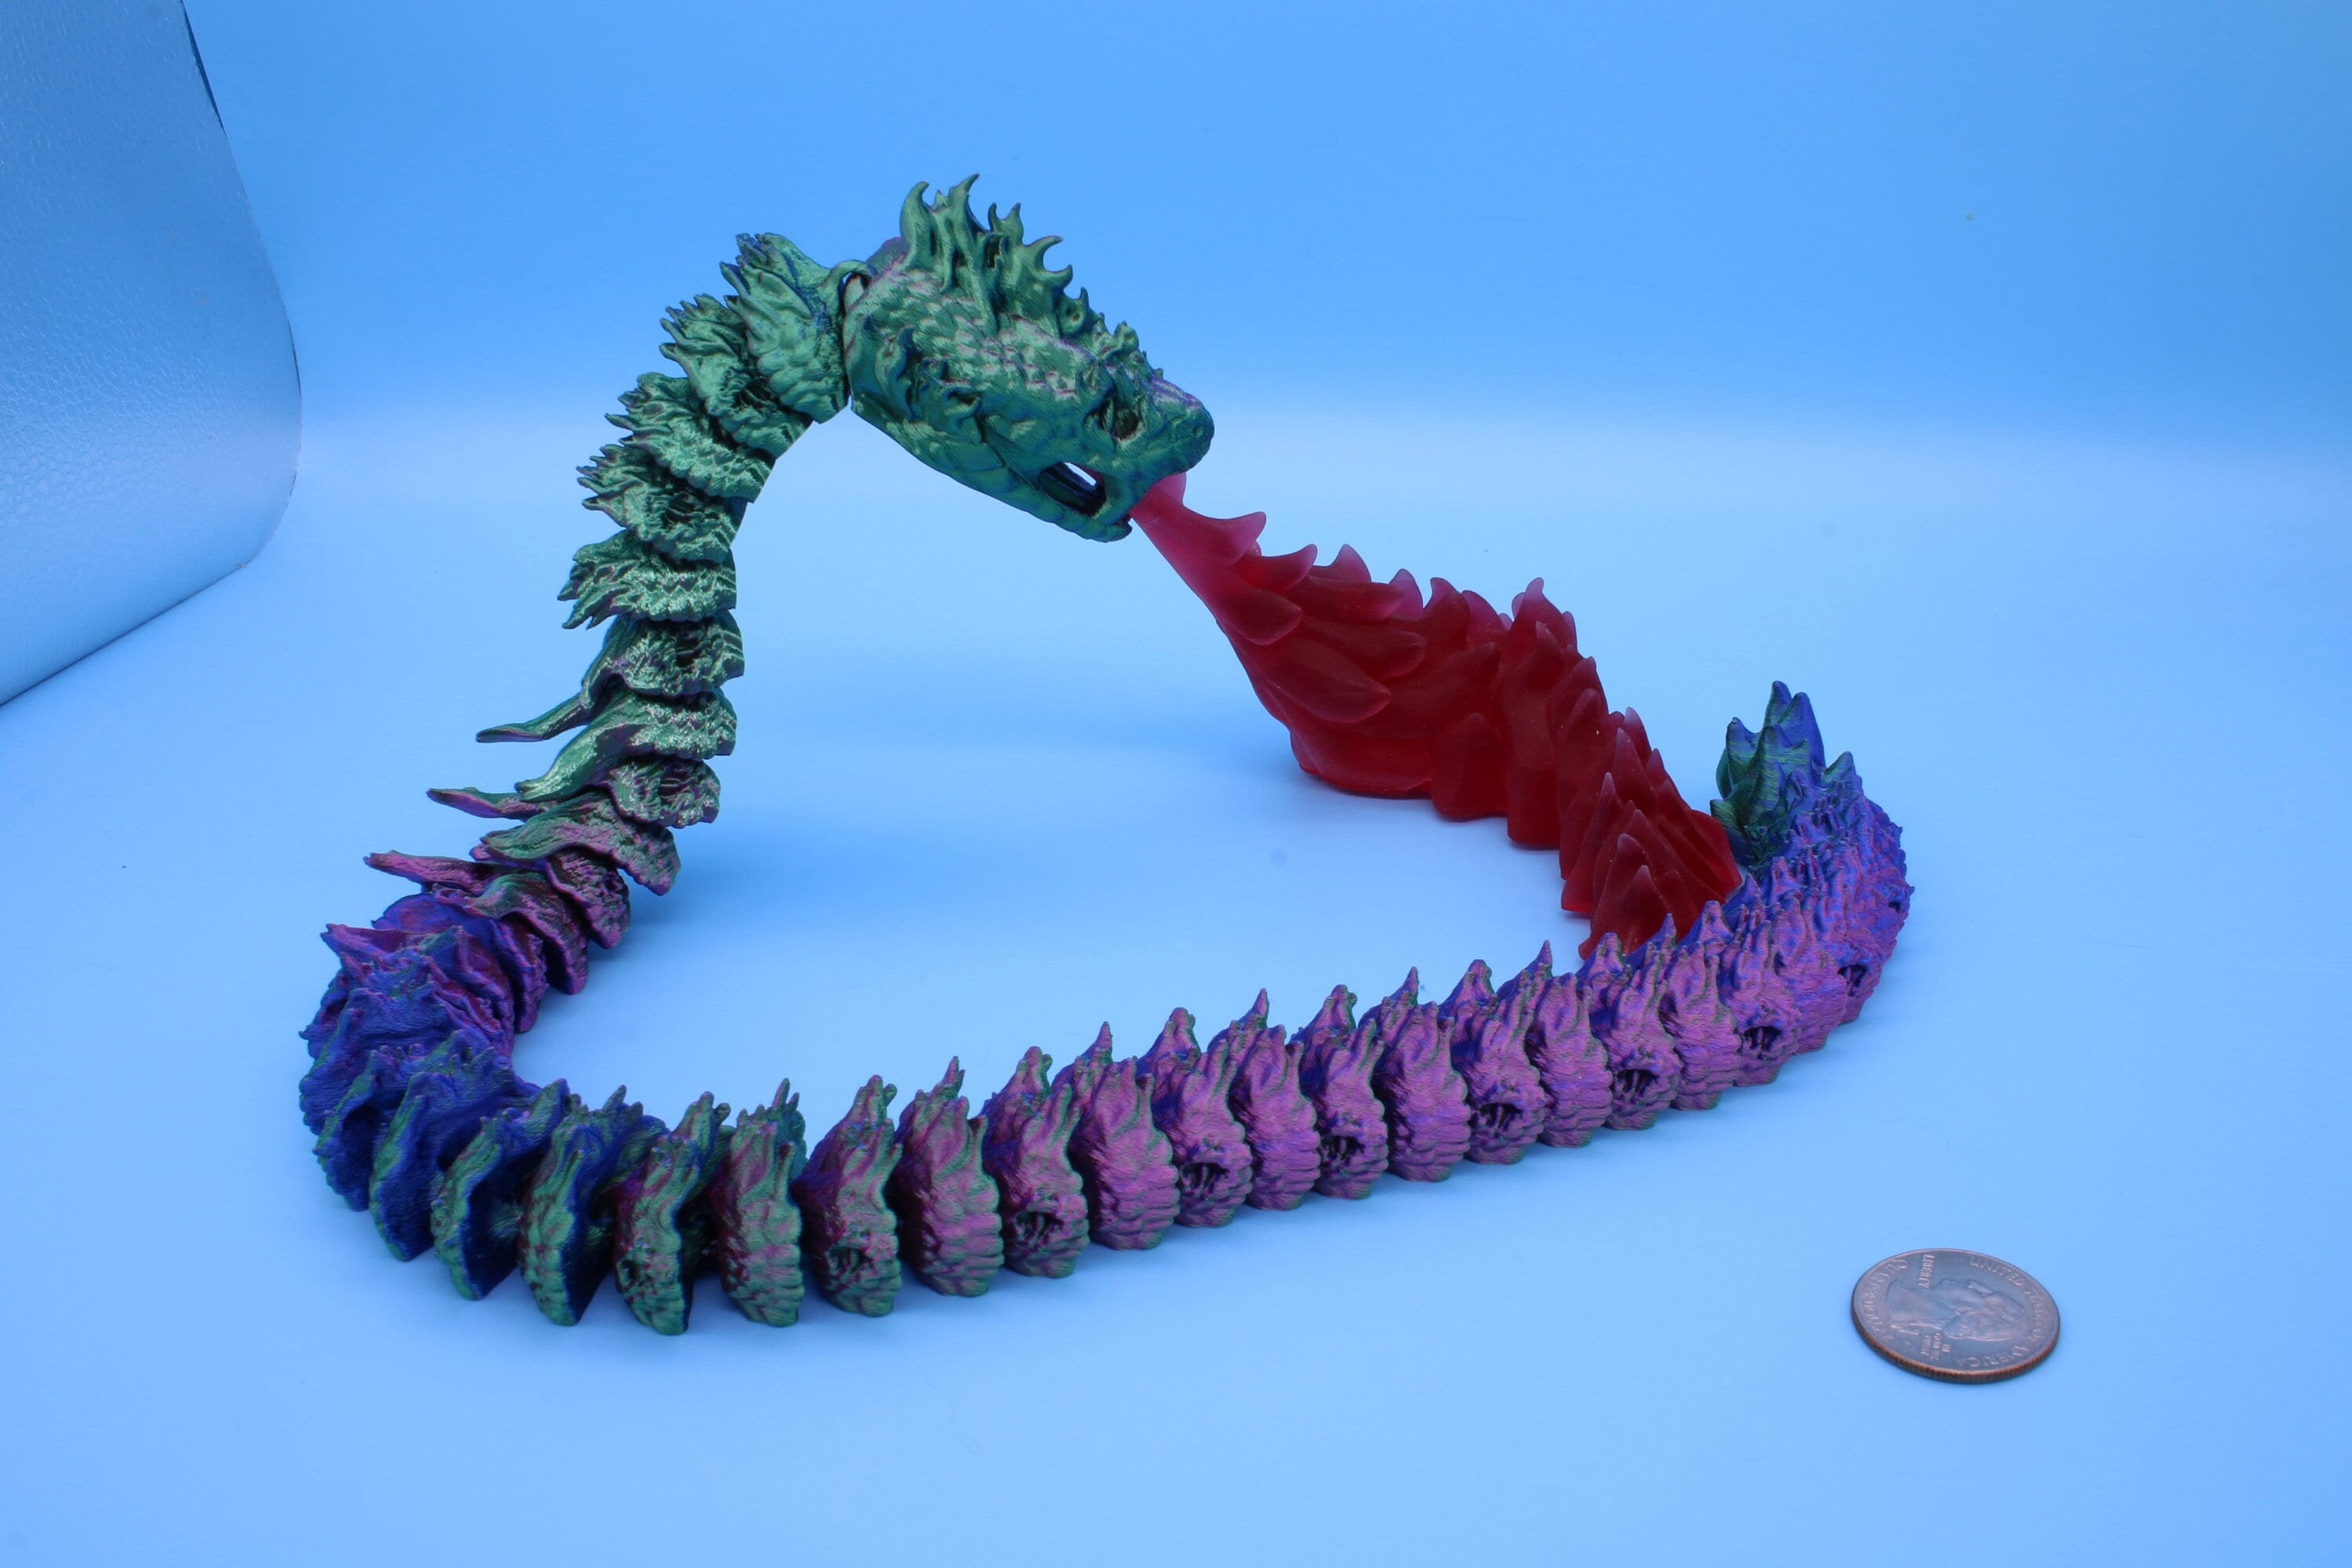 Articulating Boitata Dragon | 3D Printed | Multi Color Unique Dragon | Dragon With Flame Stand | Great Fidget Toy | Desk Buddy | Sensory Toy